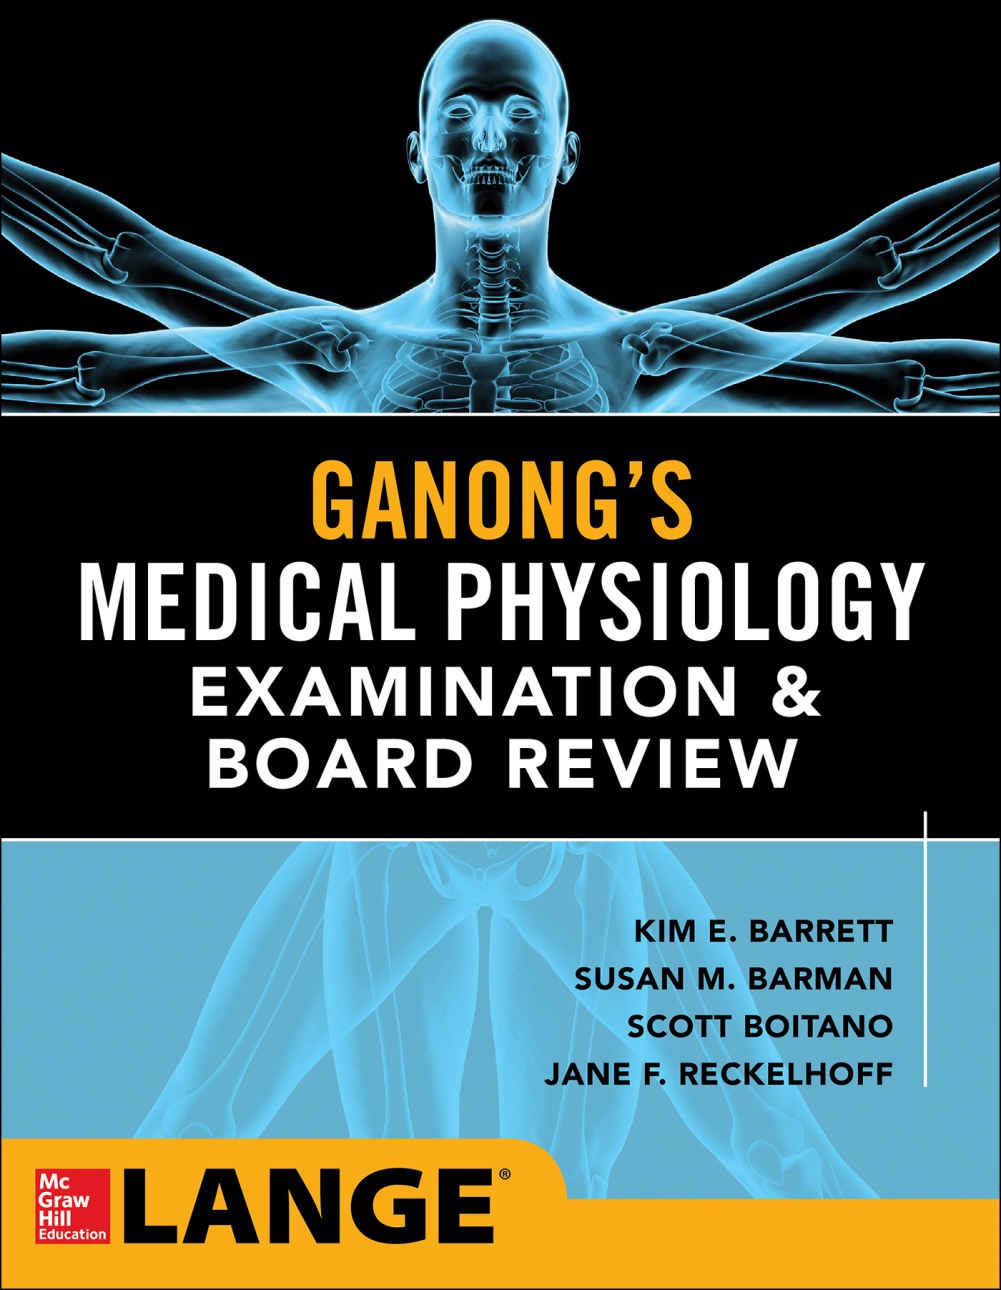 Ganong’s Physiology Examination and Board Review PDF 1st Edition free download